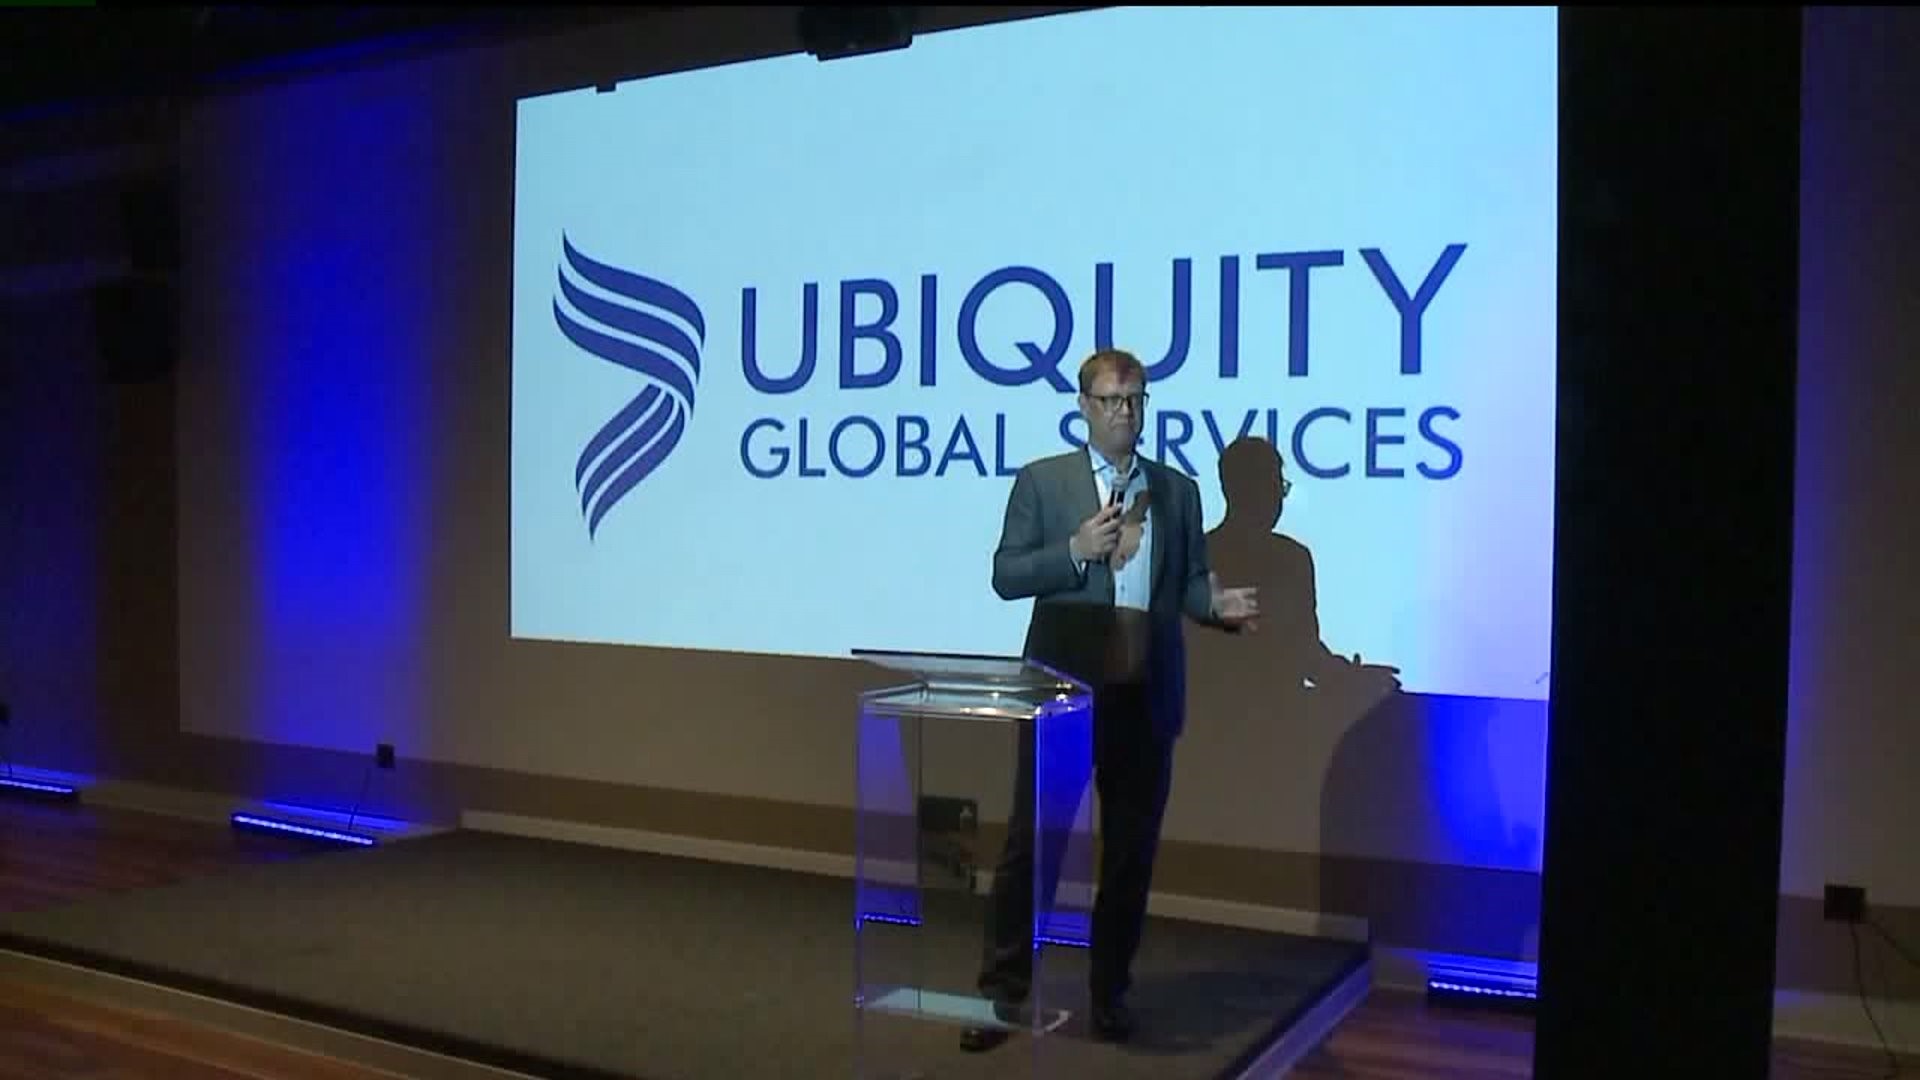 Ubiquity Global Services to Bring Hundreds of Jobs to Luzerne County